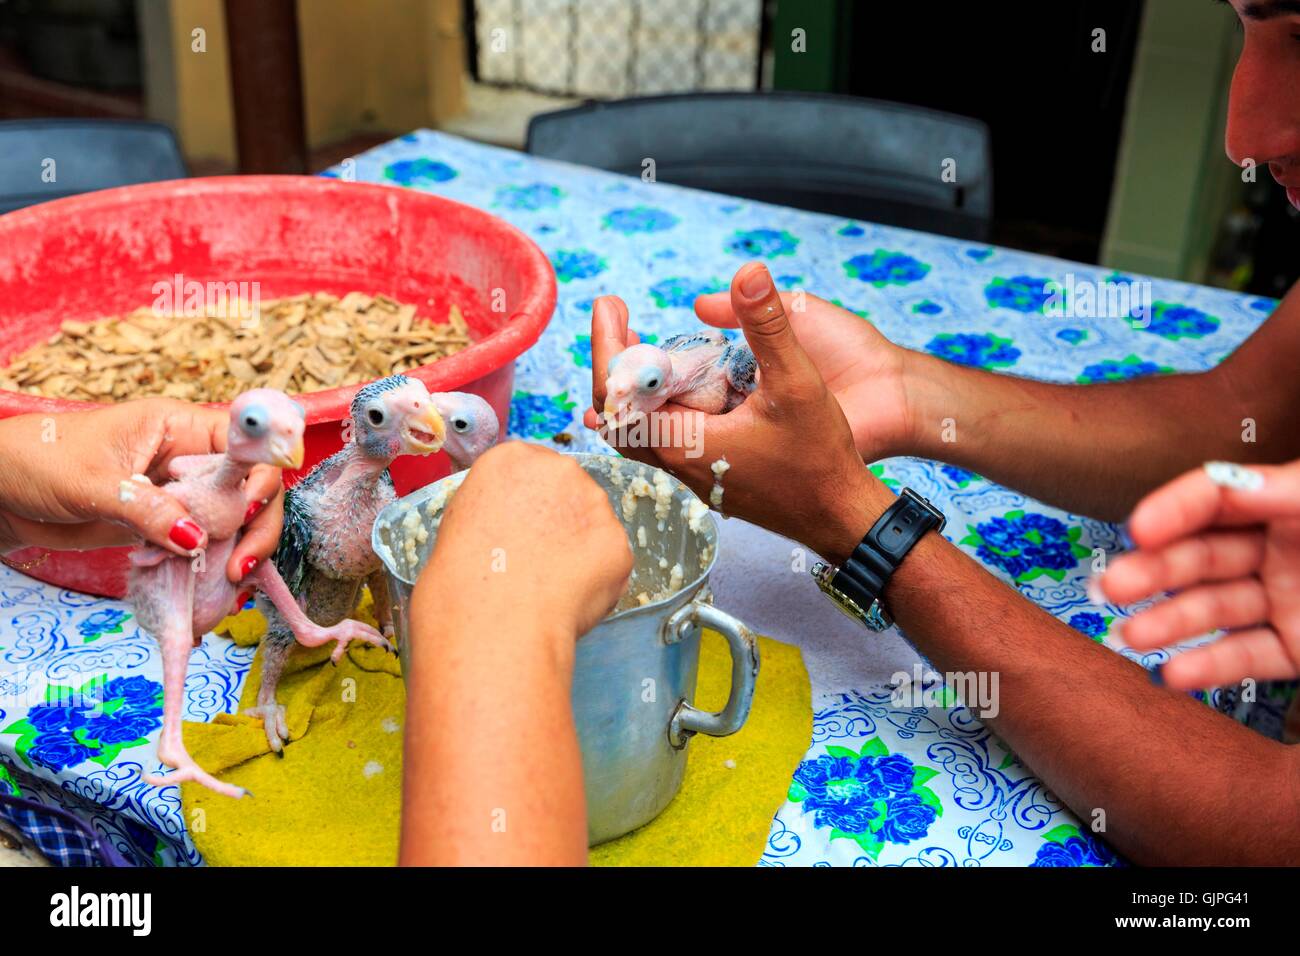 Group of tropical baby parrots being fed and hand-reared in rural Cuba Stock Photo